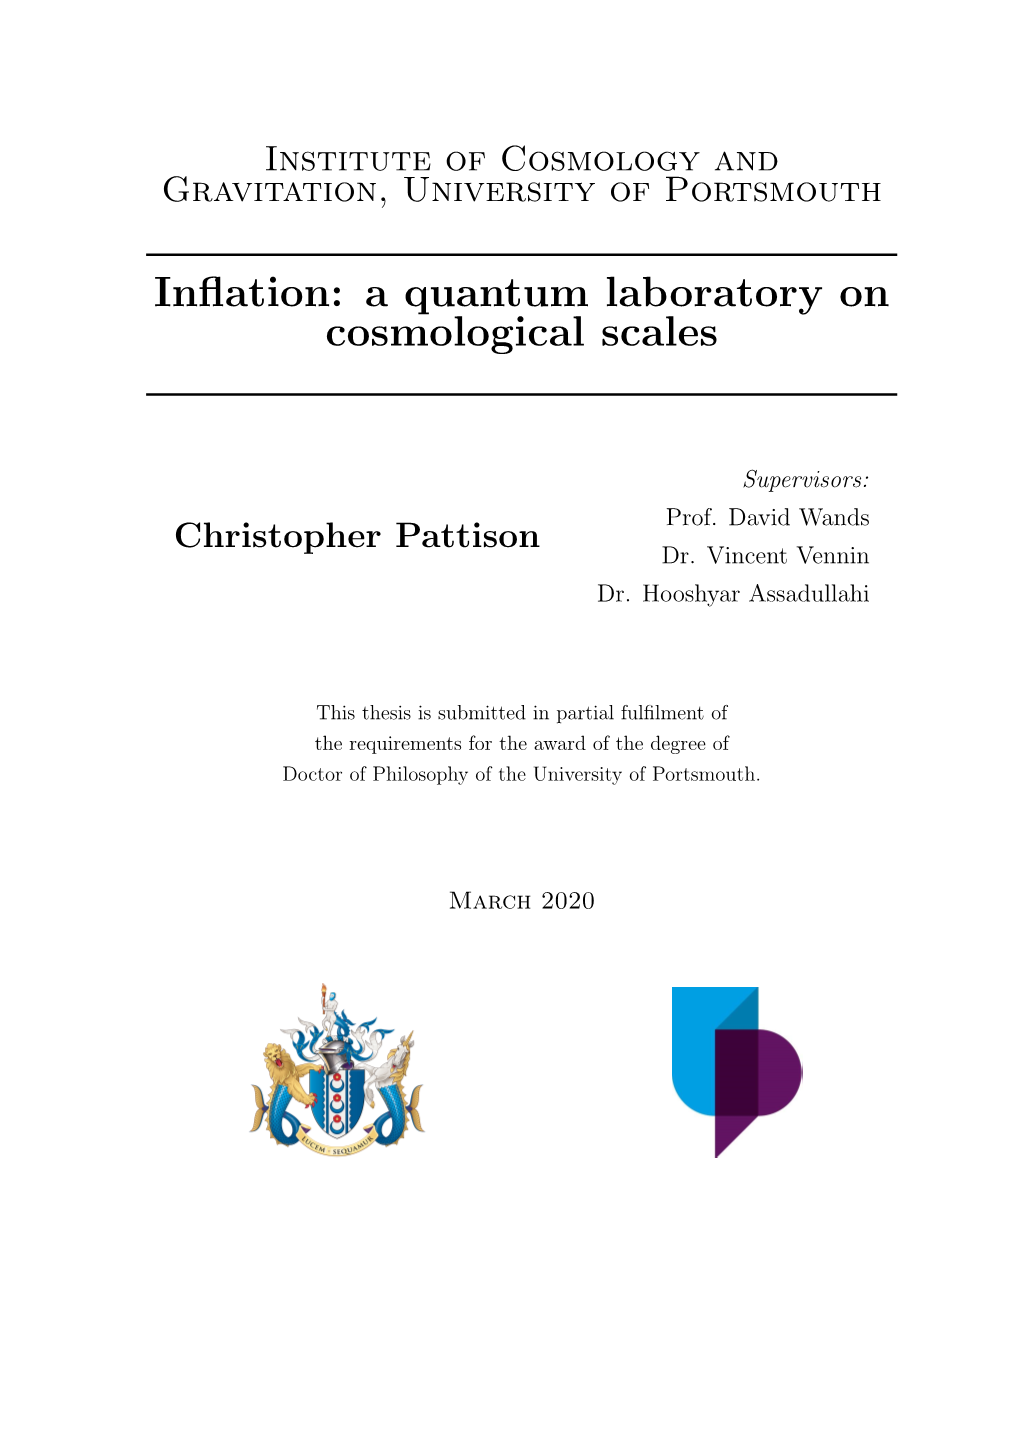 Inflation: a Quantum Laboratory on Cosmological Scales